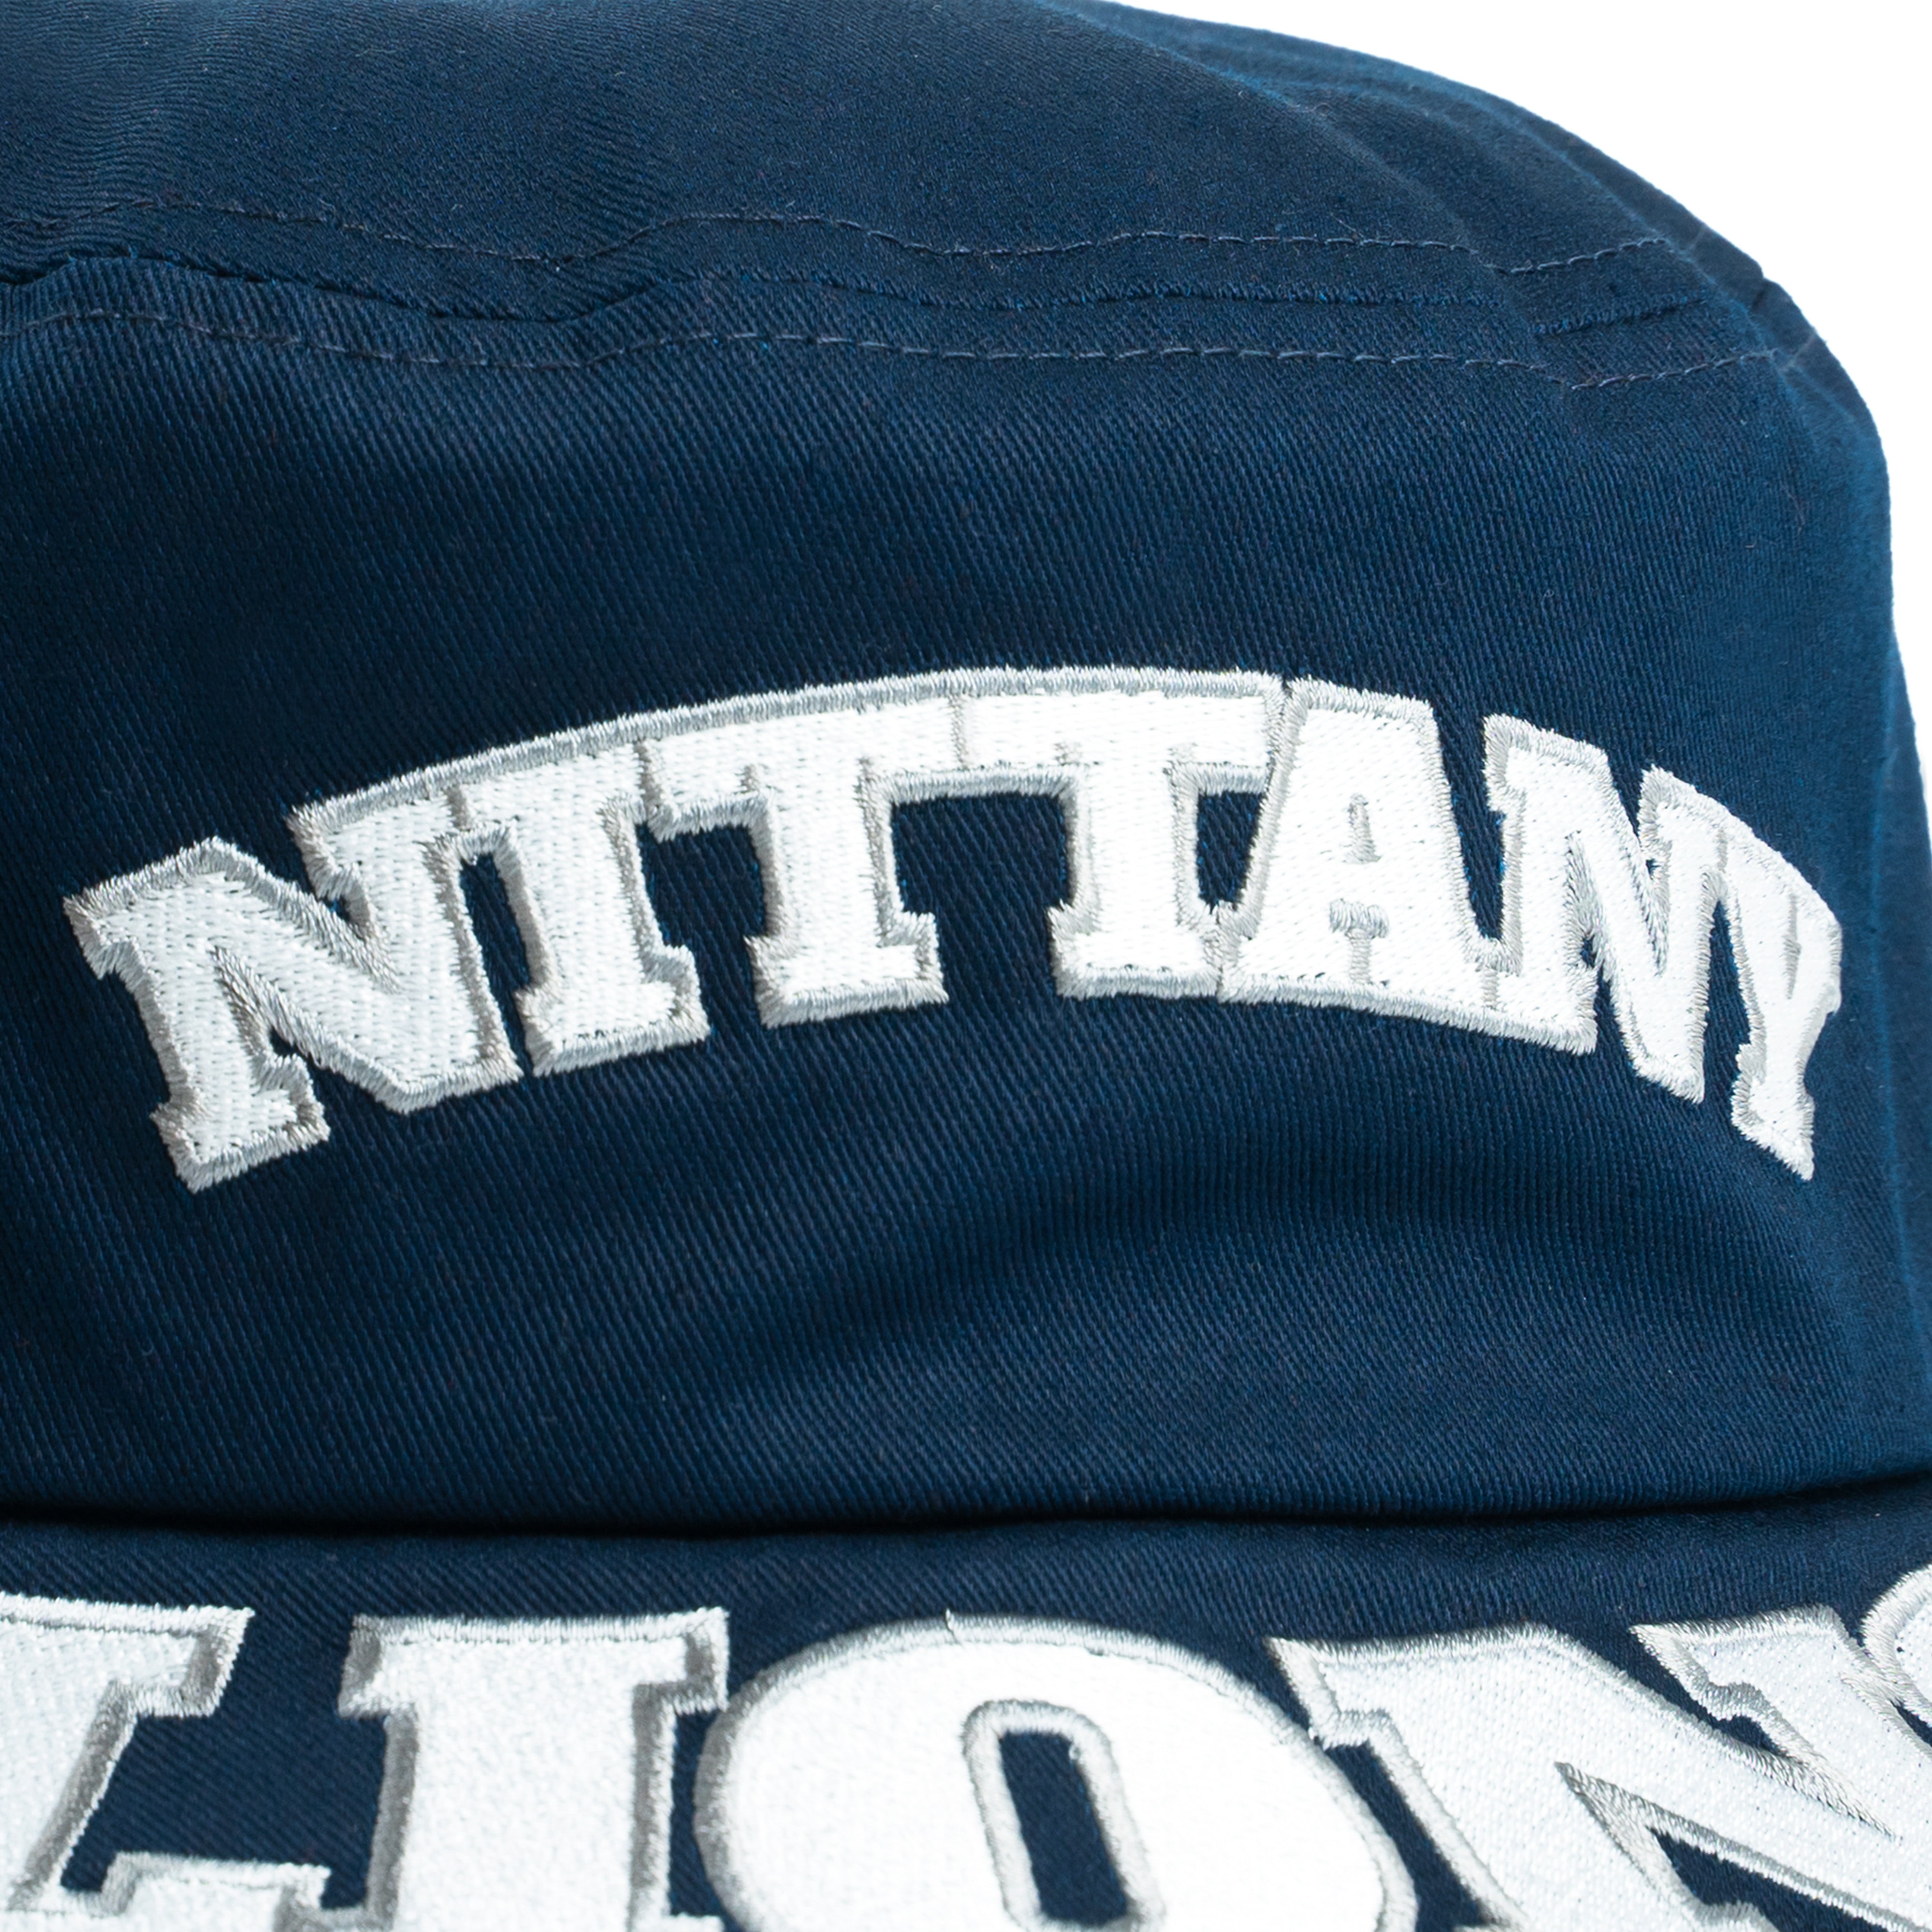 Penn State Nittany Lions Bucket Hat